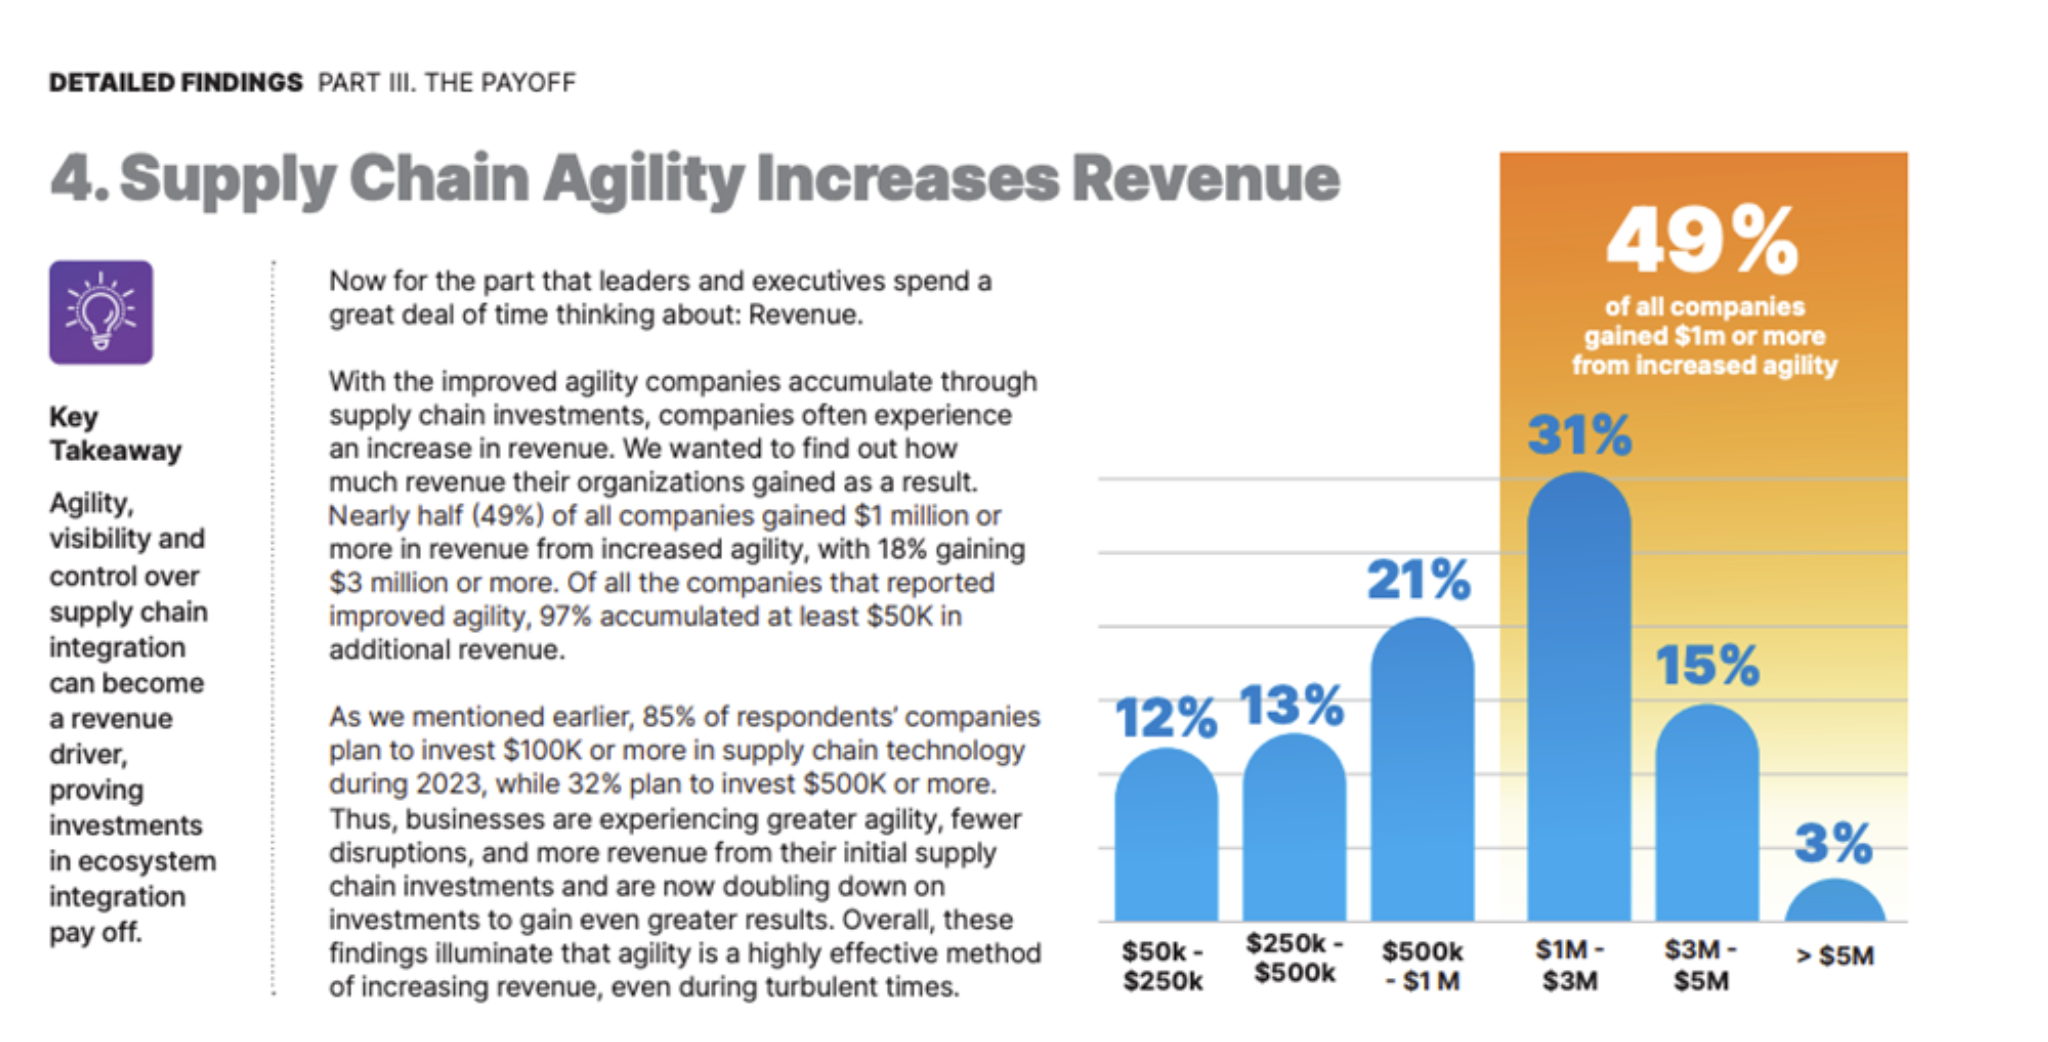 Achieve business agility with ecosystem integration